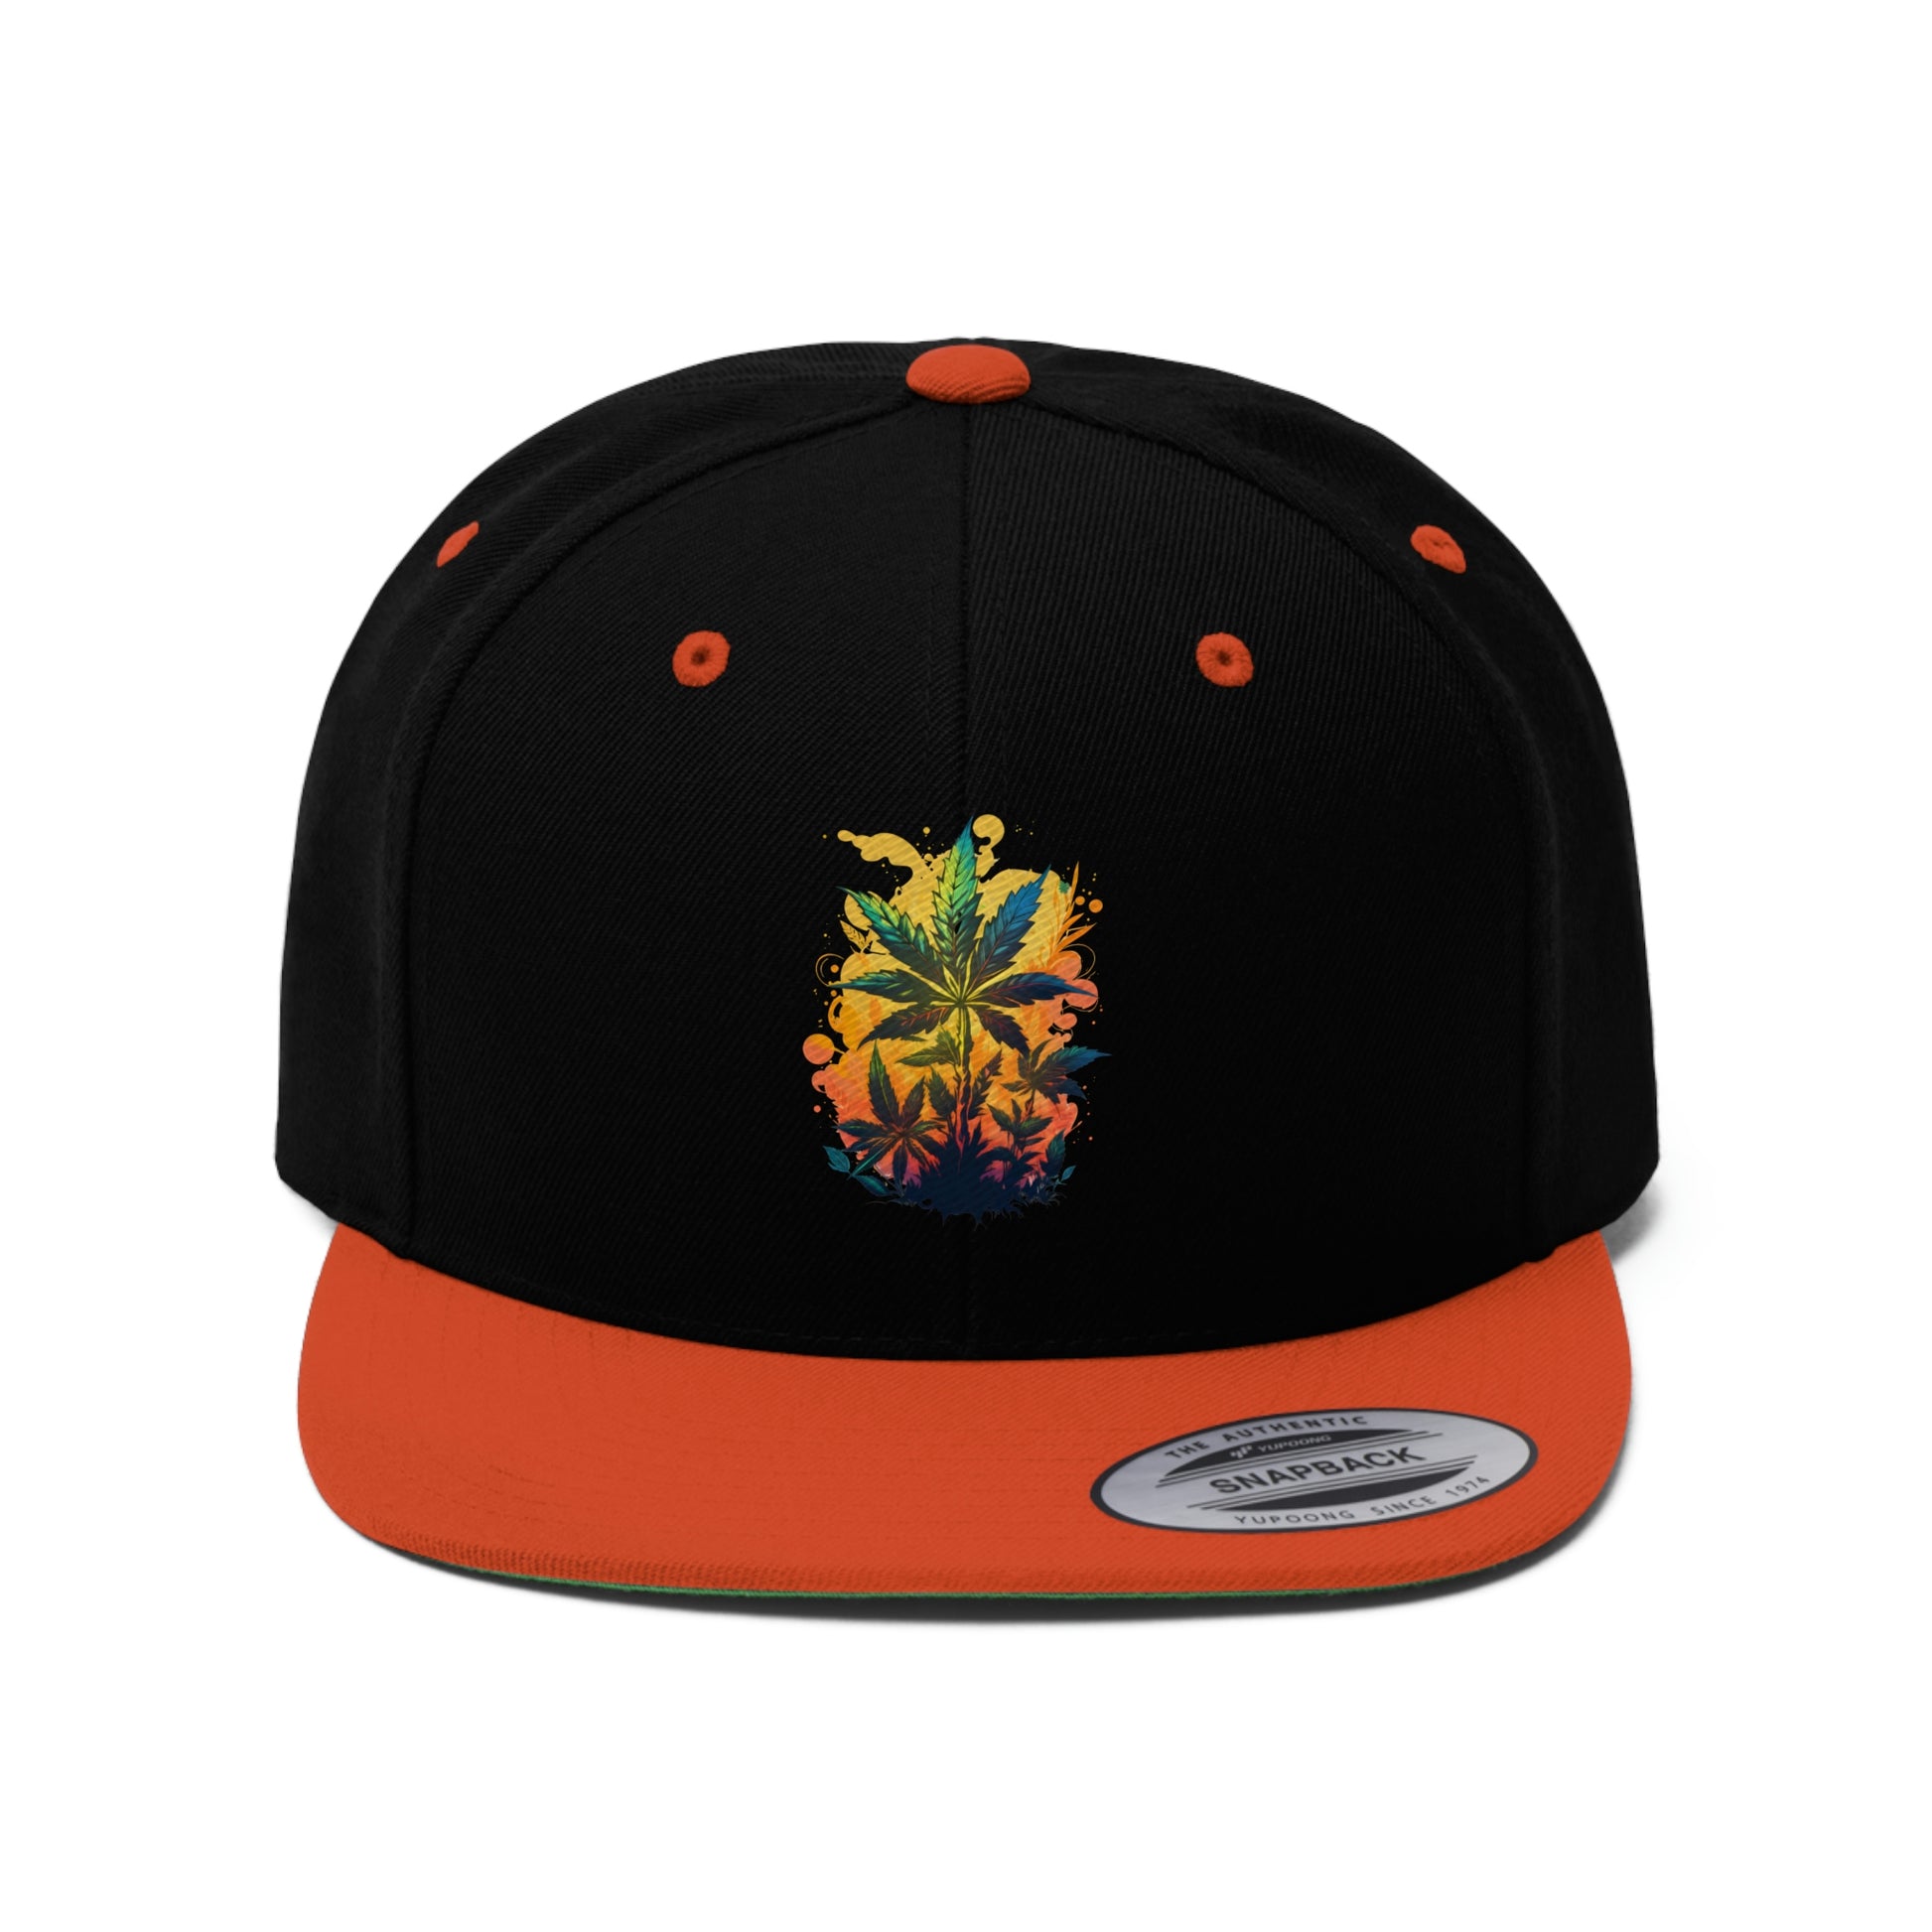 Warm Cannabis Paradise Snapback Hat with weed leaves on an orange and yellow background in the orange and black color way